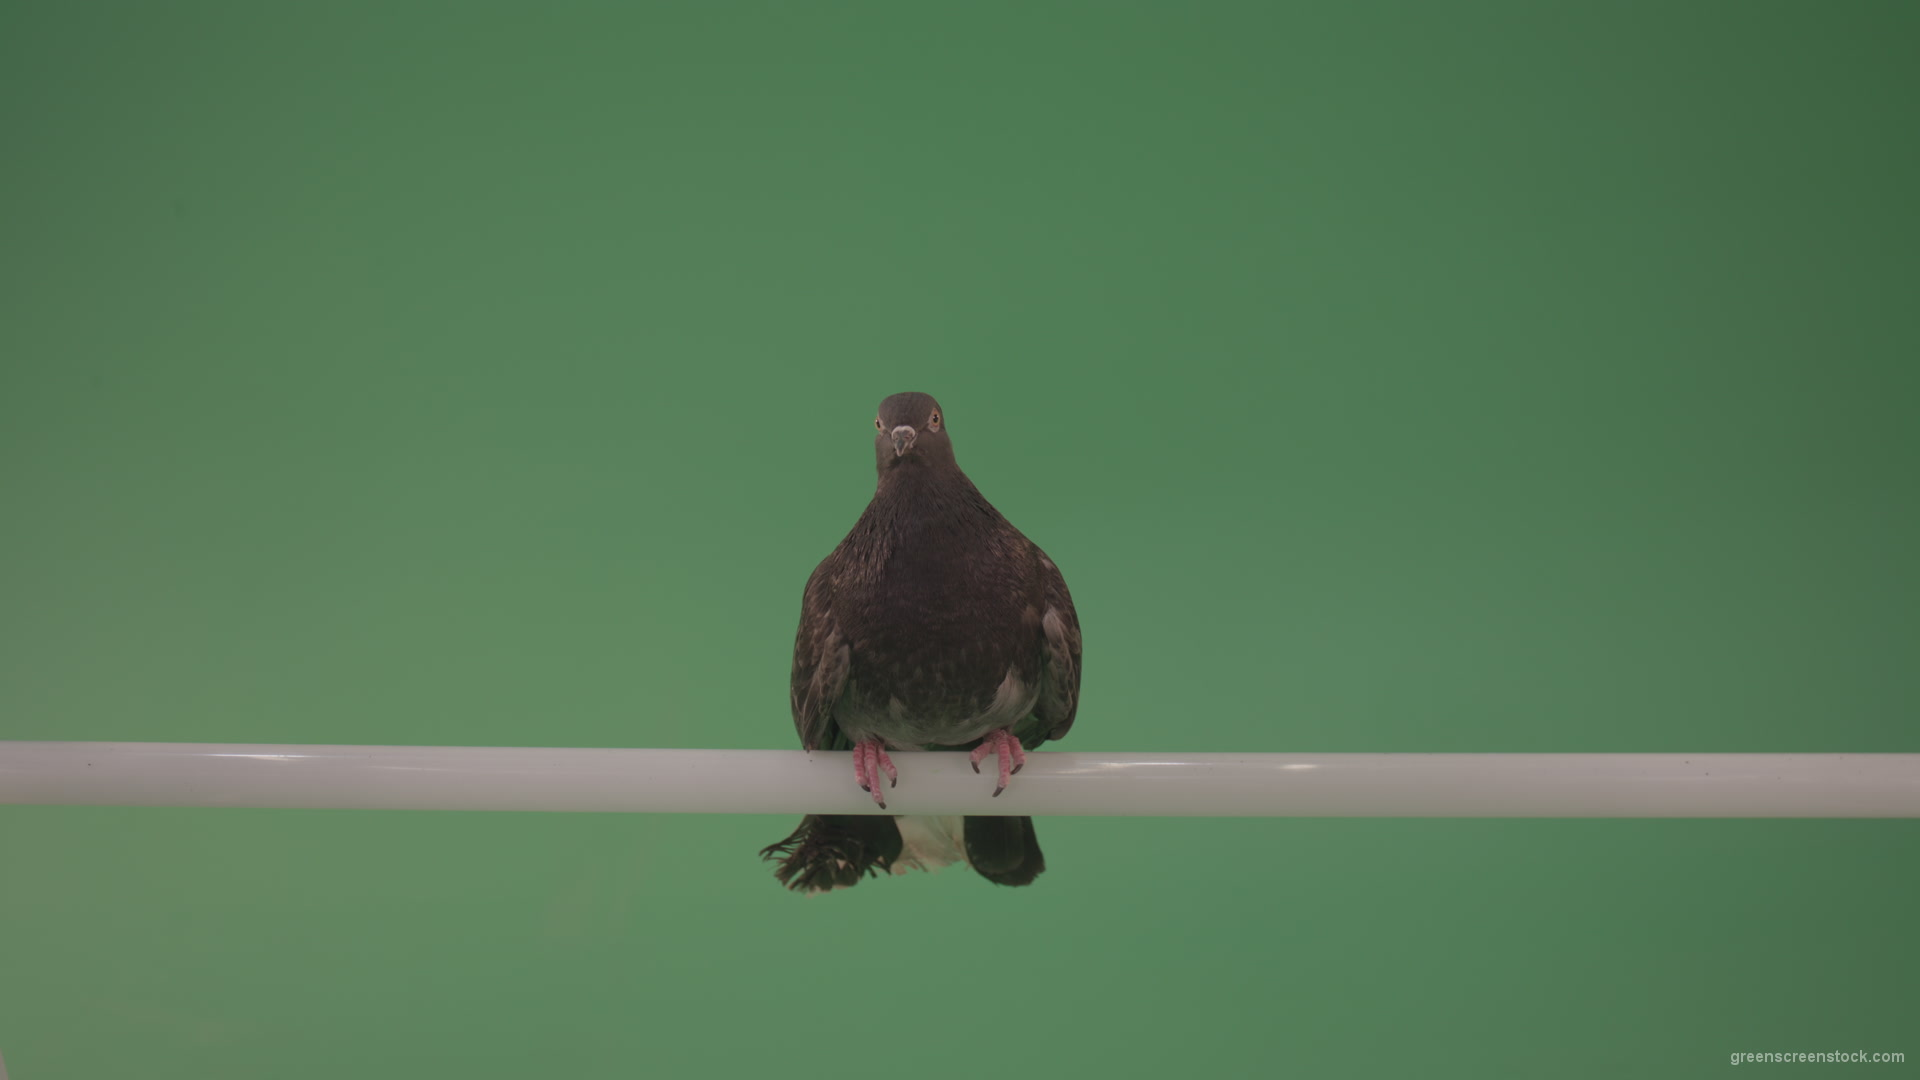 Wild-bird-doves-sit-on-the-branch-and-peer-around-isolated-on-green-screen_006 Green Screen Stock